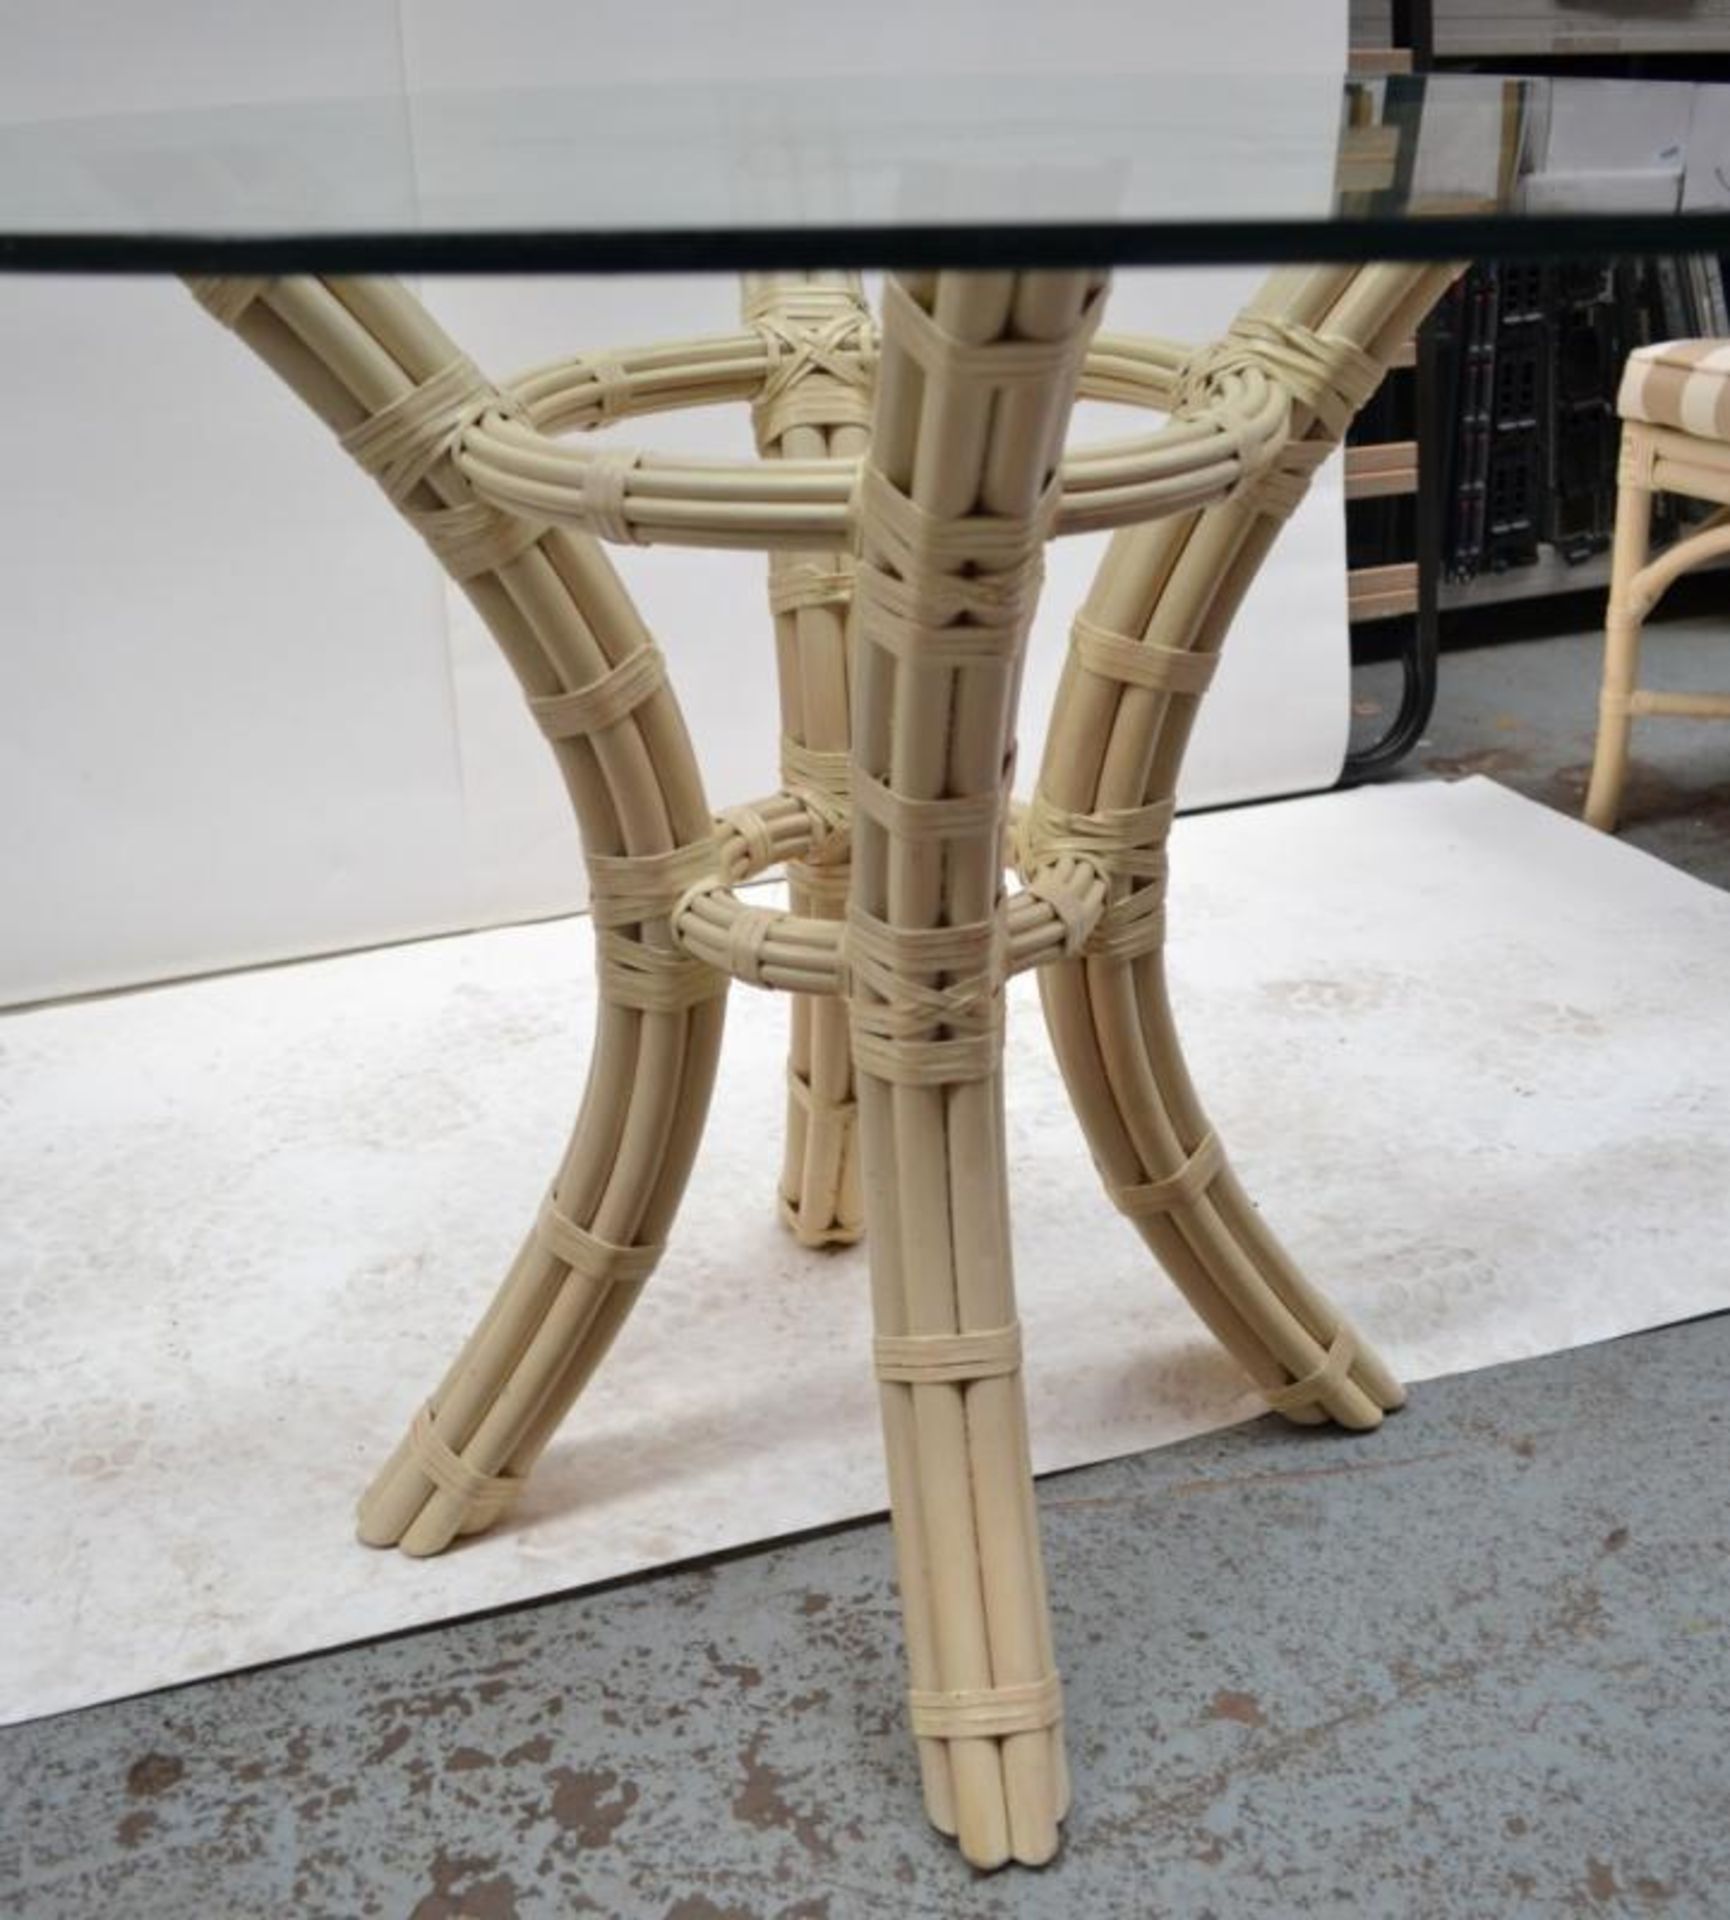 1 x Glass Topped Cane Table with 4 Chairs - Pre-owned In Good Condition - AE010 - CL007 - - Image 9 of 13